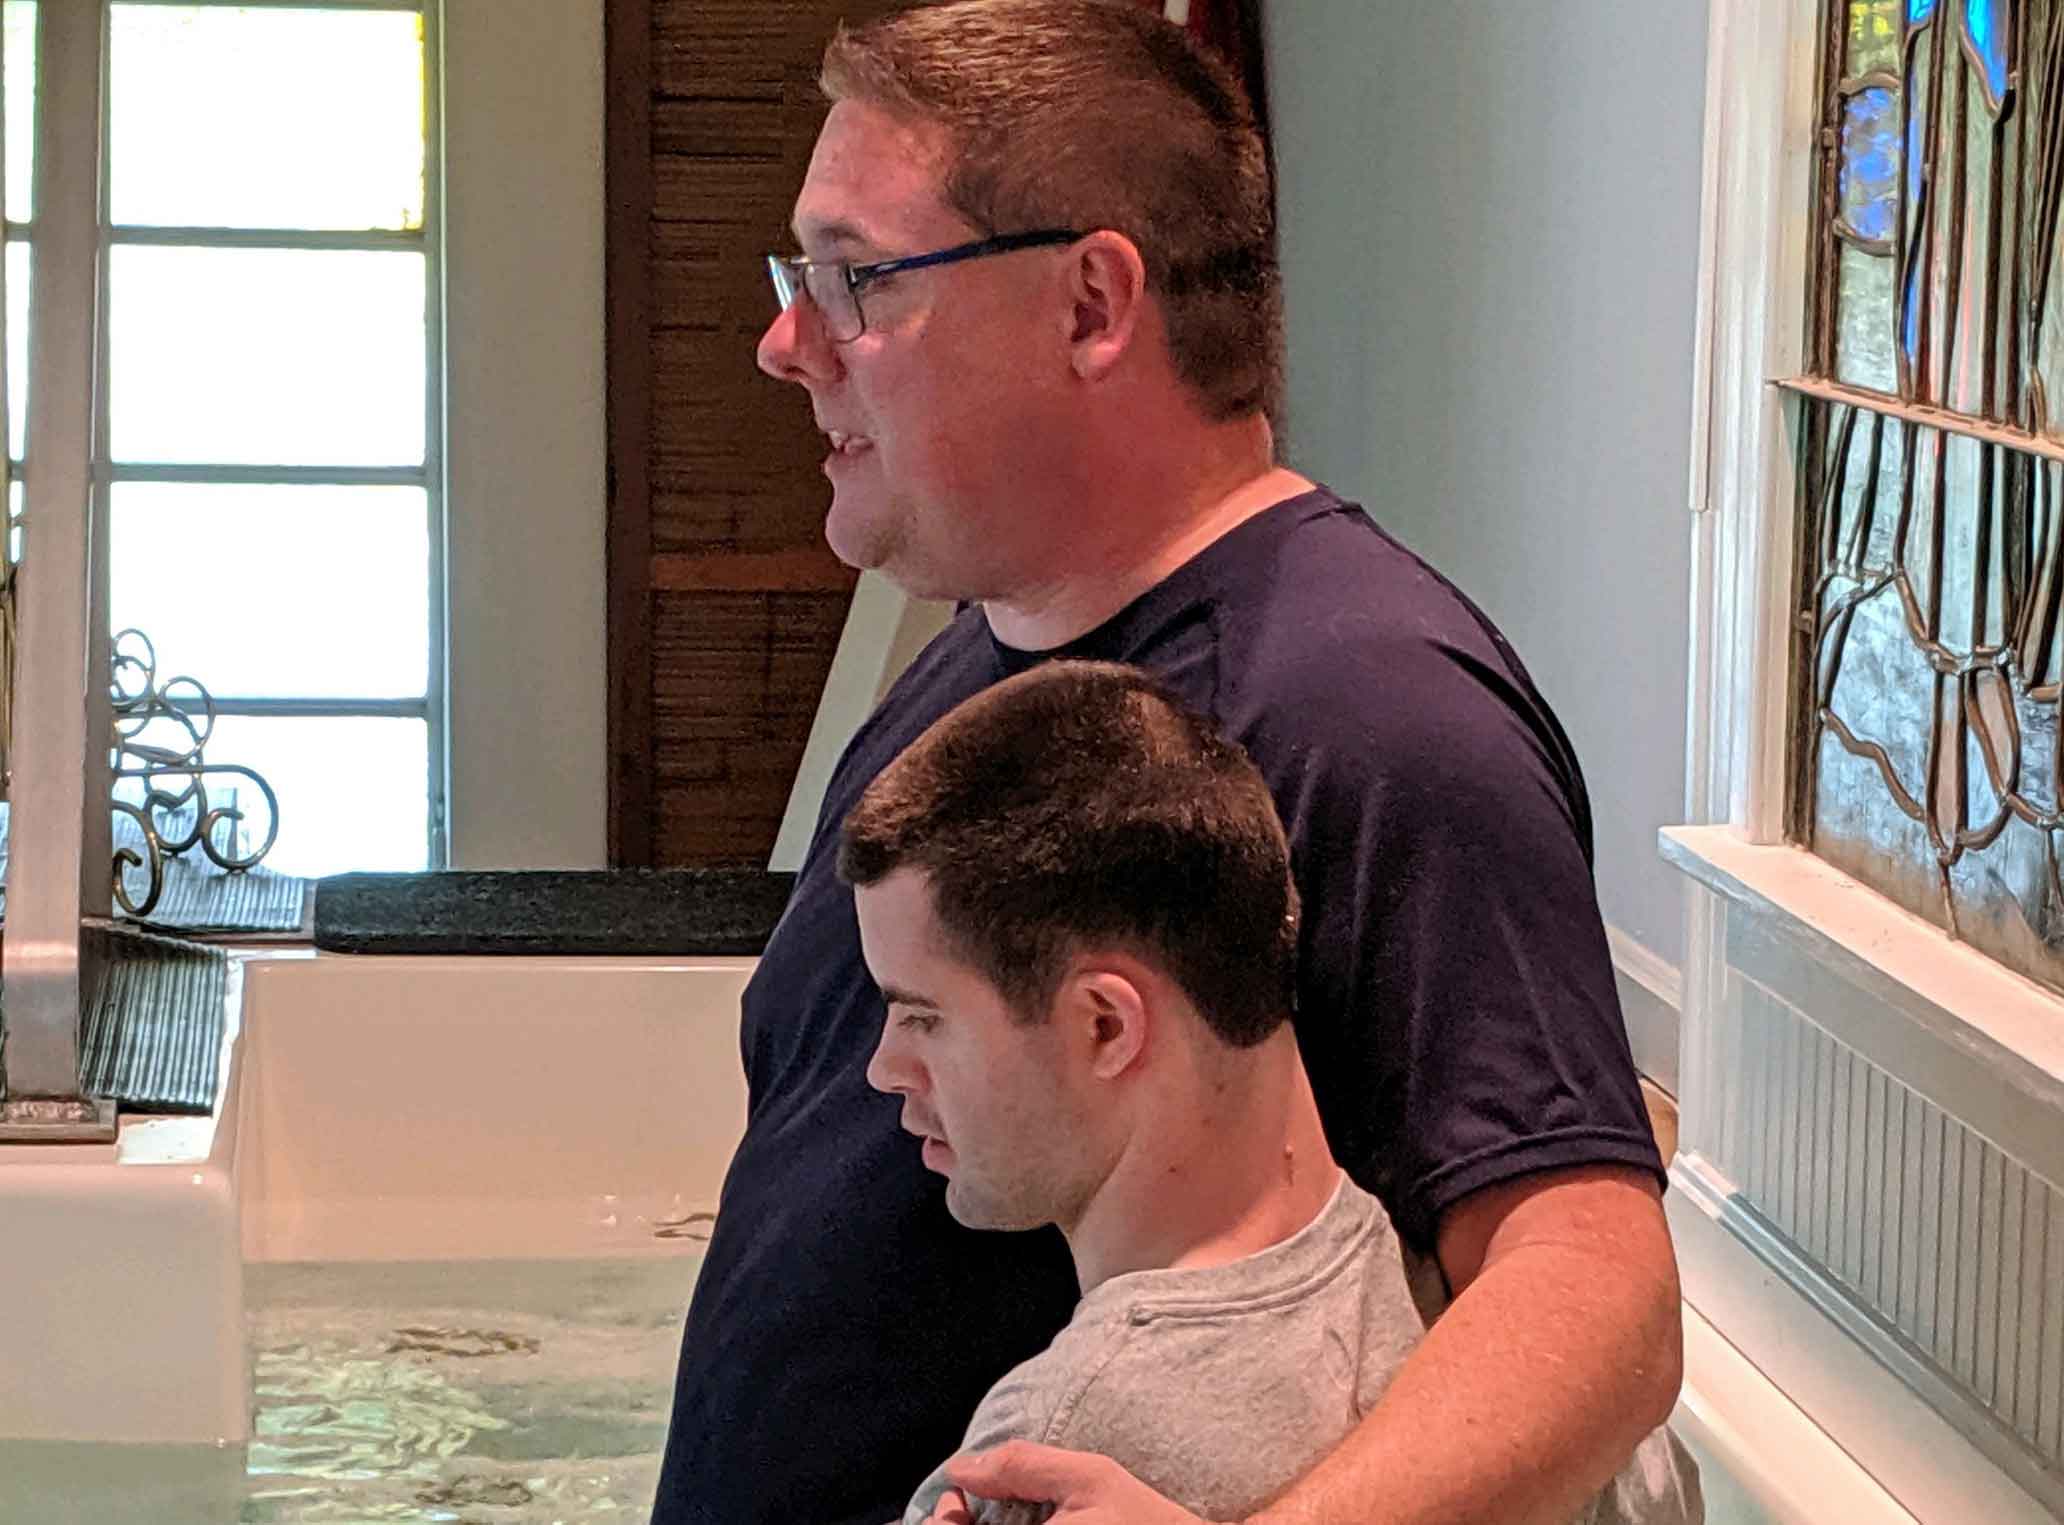 Pastor Jim baptizes young man with special needs